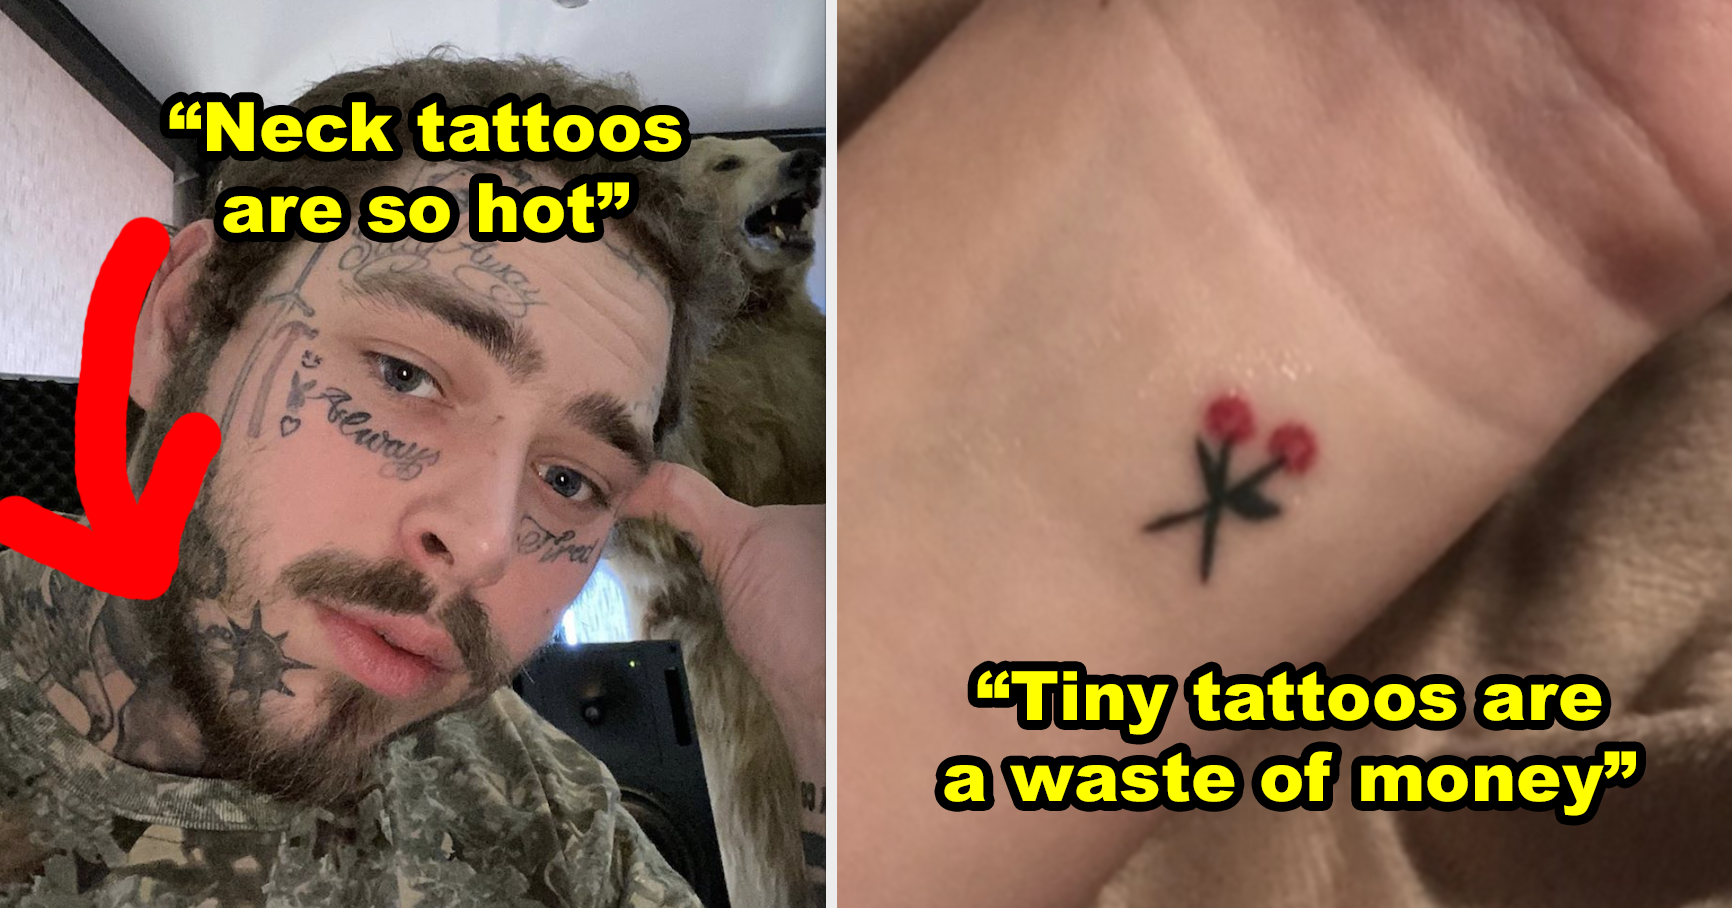 4 Most Regrettable Types of Tattoos